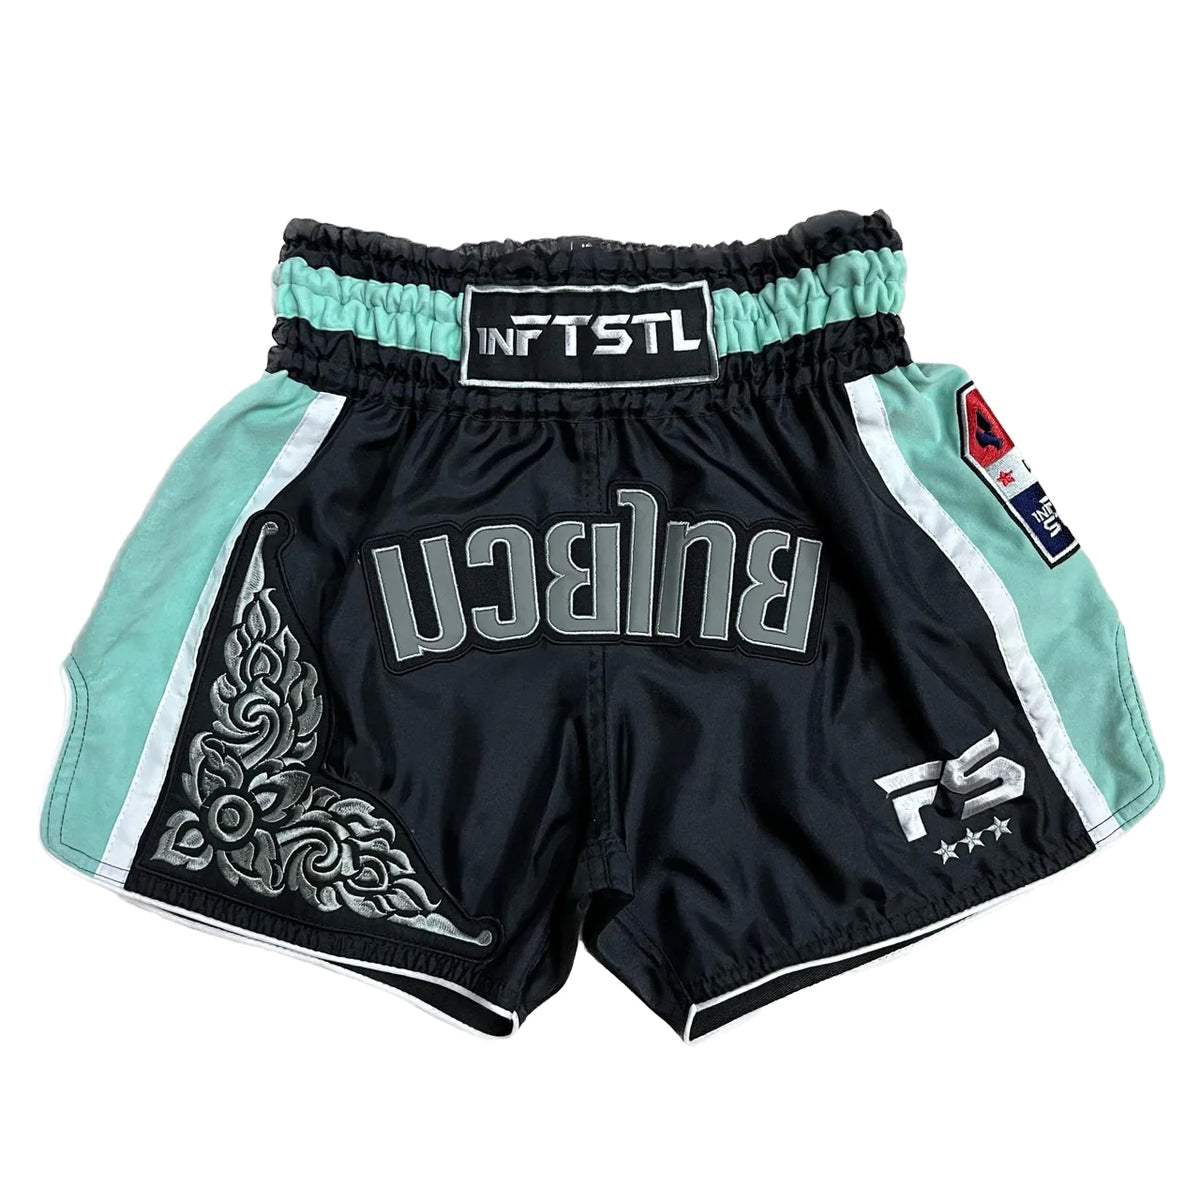 Buy Muay Thai, Kickboxing and Boxing Gear